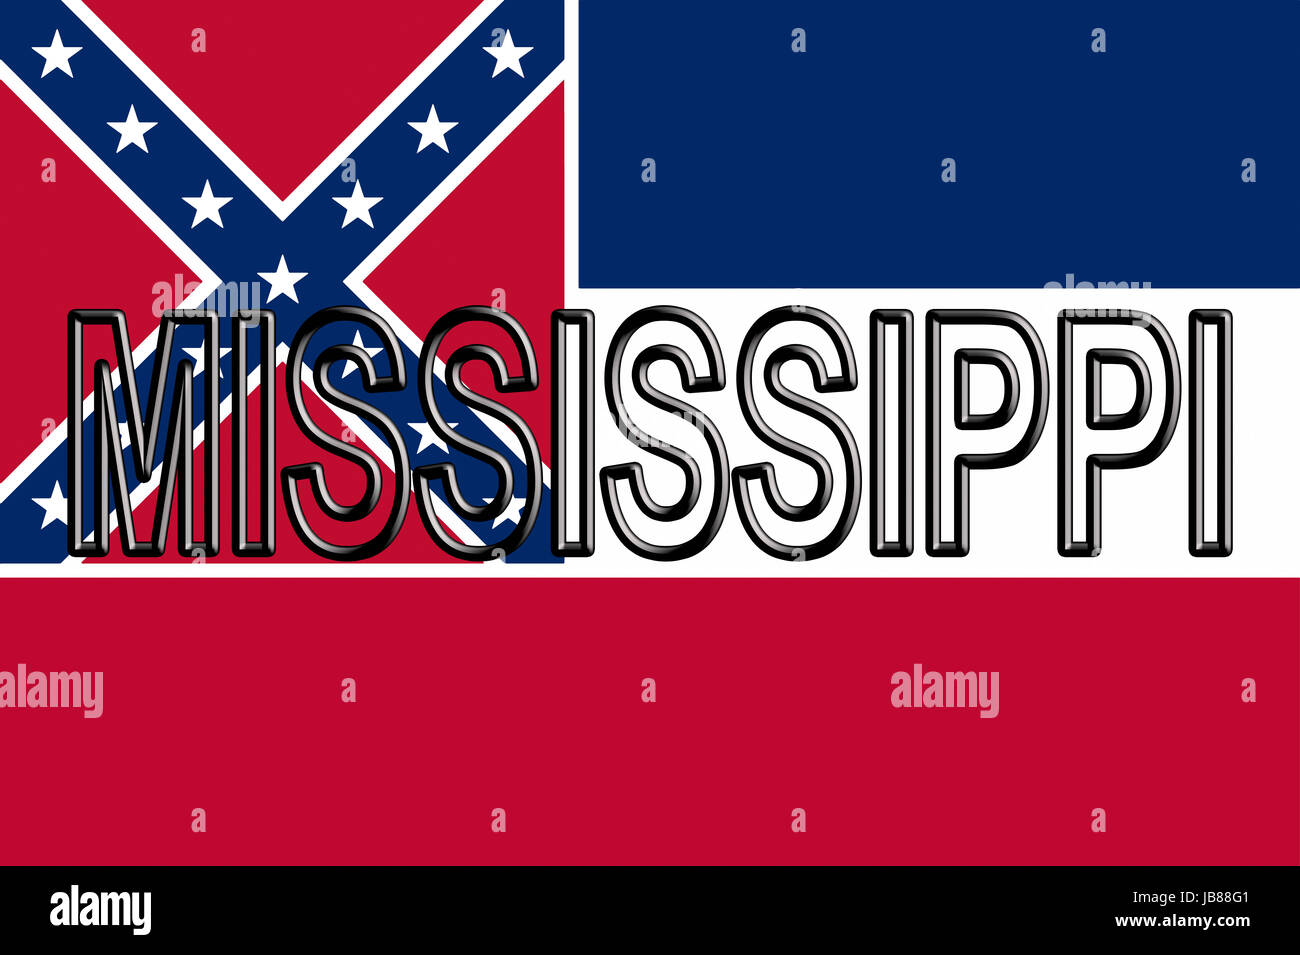 Illustration of the flag of Mississippi state in America with the state written on the flag. Stock Photo